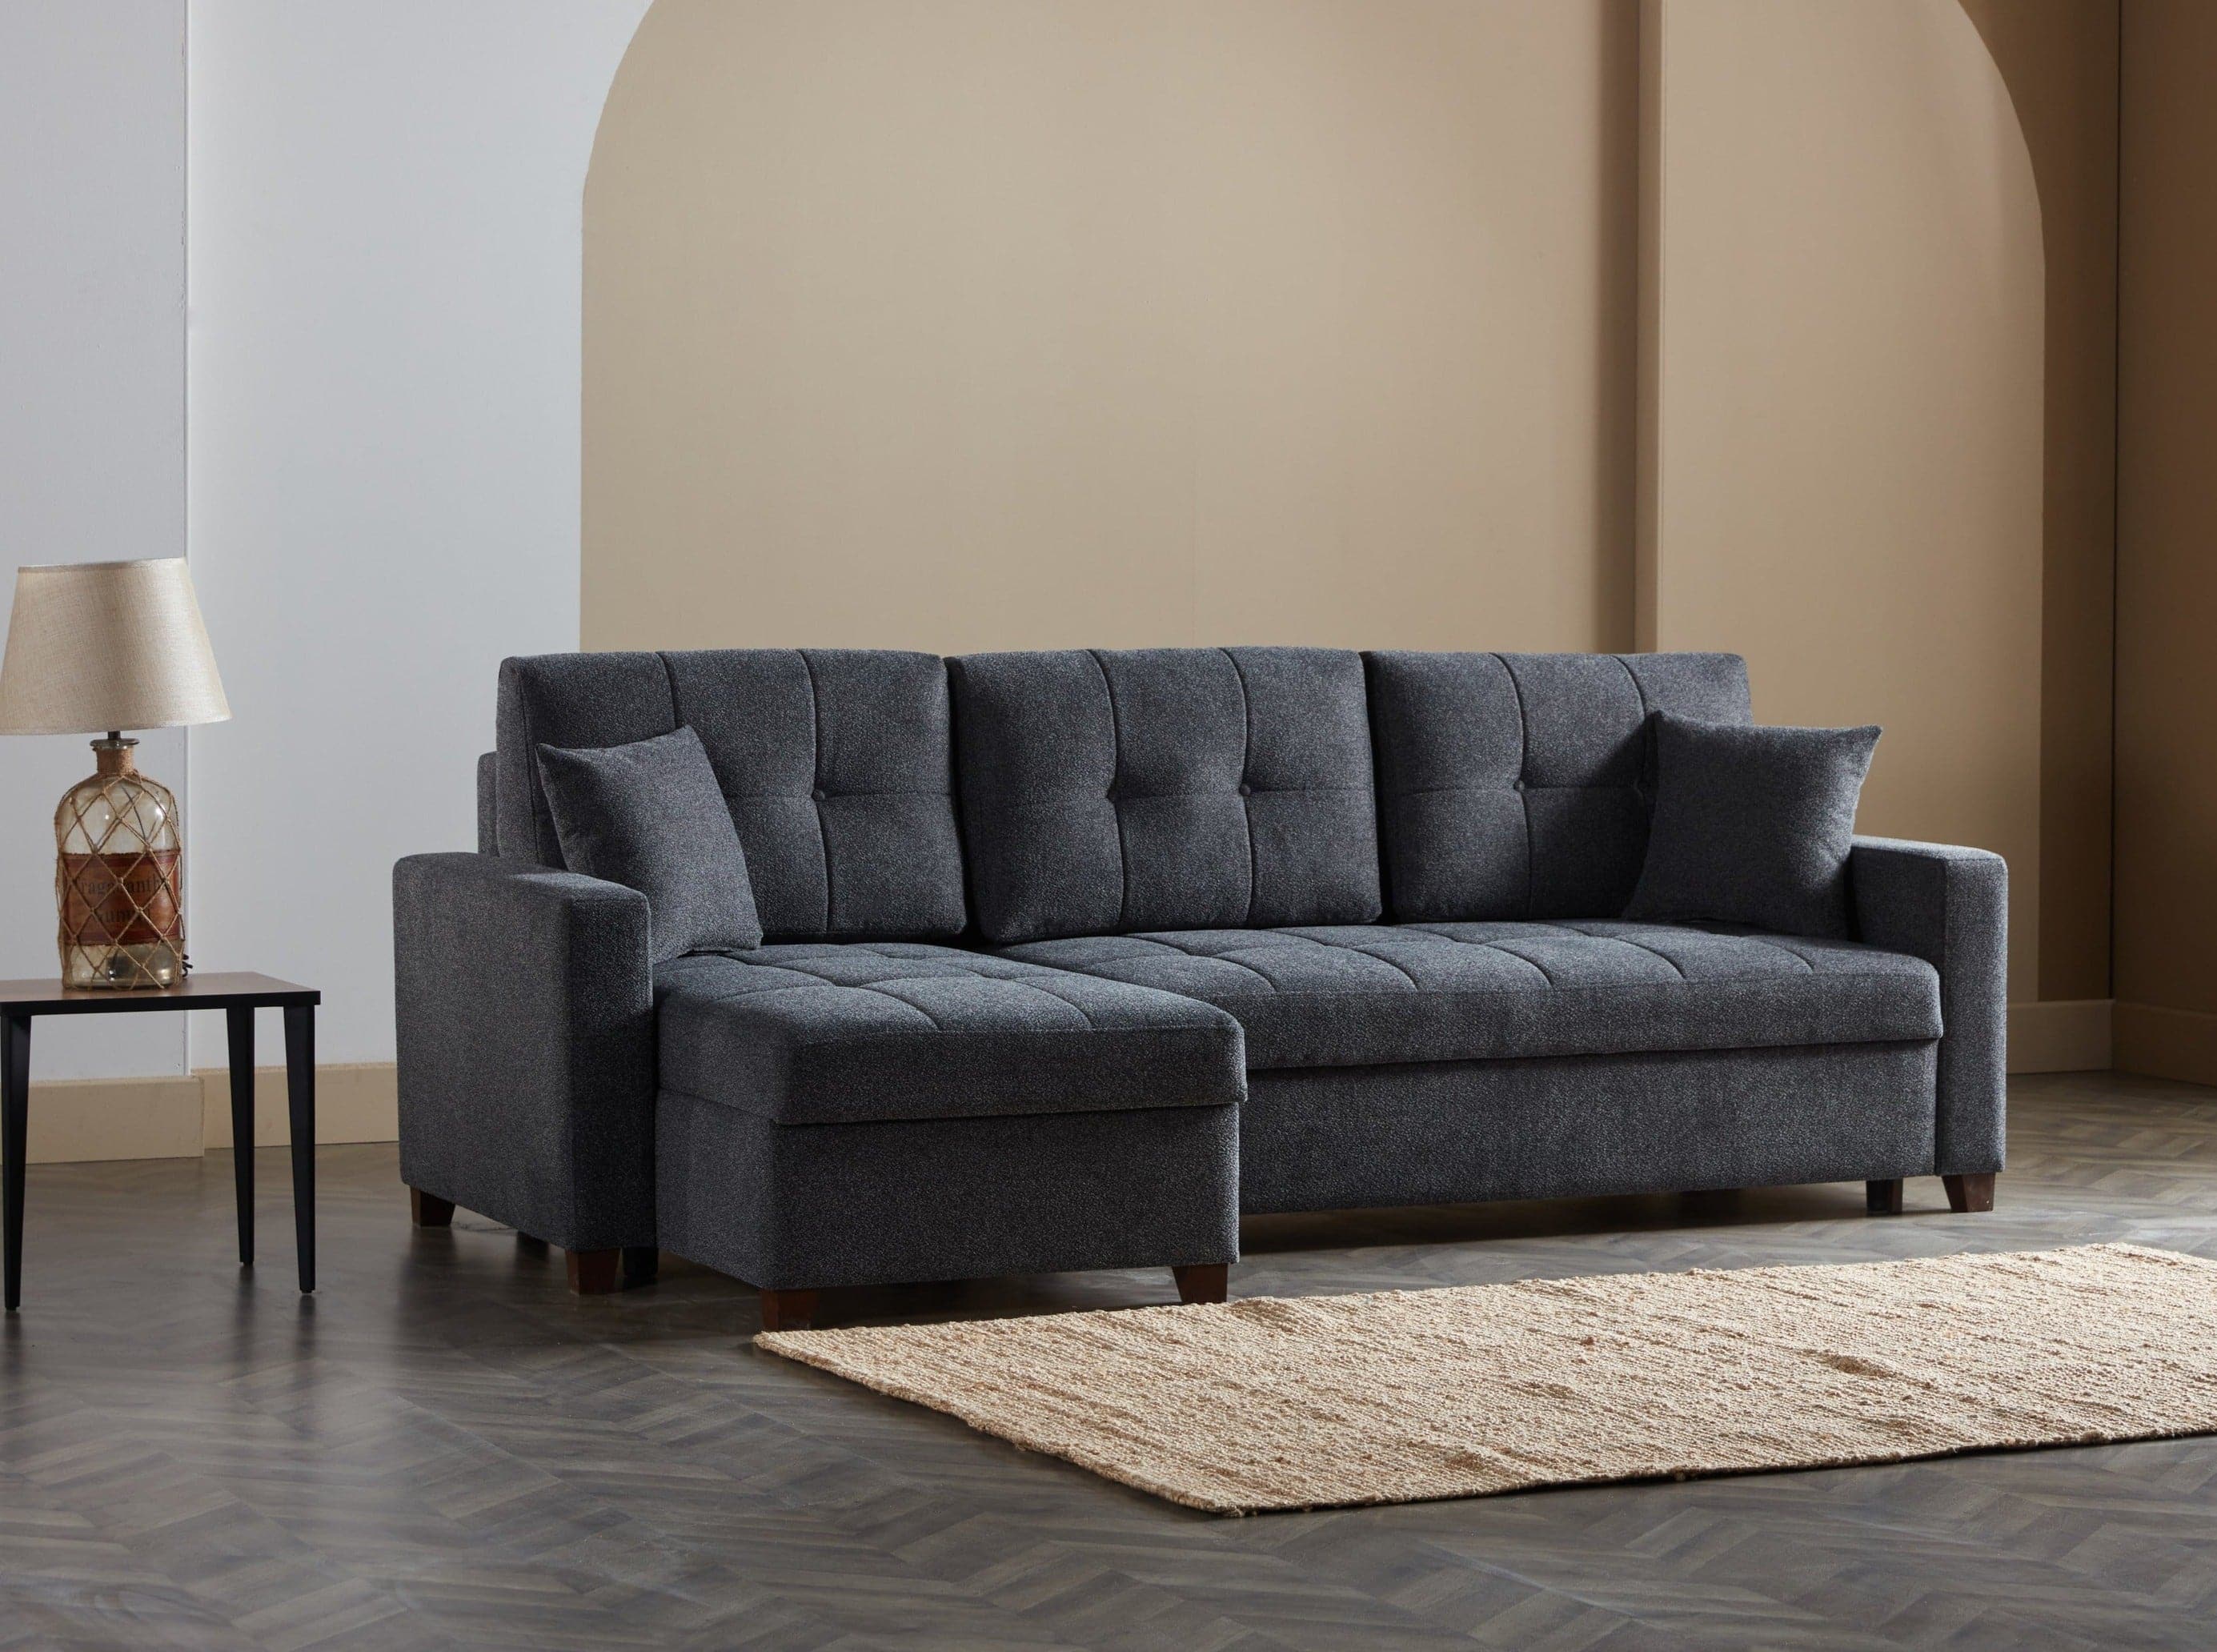 Couches Taille 5 (13-22 Kg) 56Pcs Dalaa - Locooshop